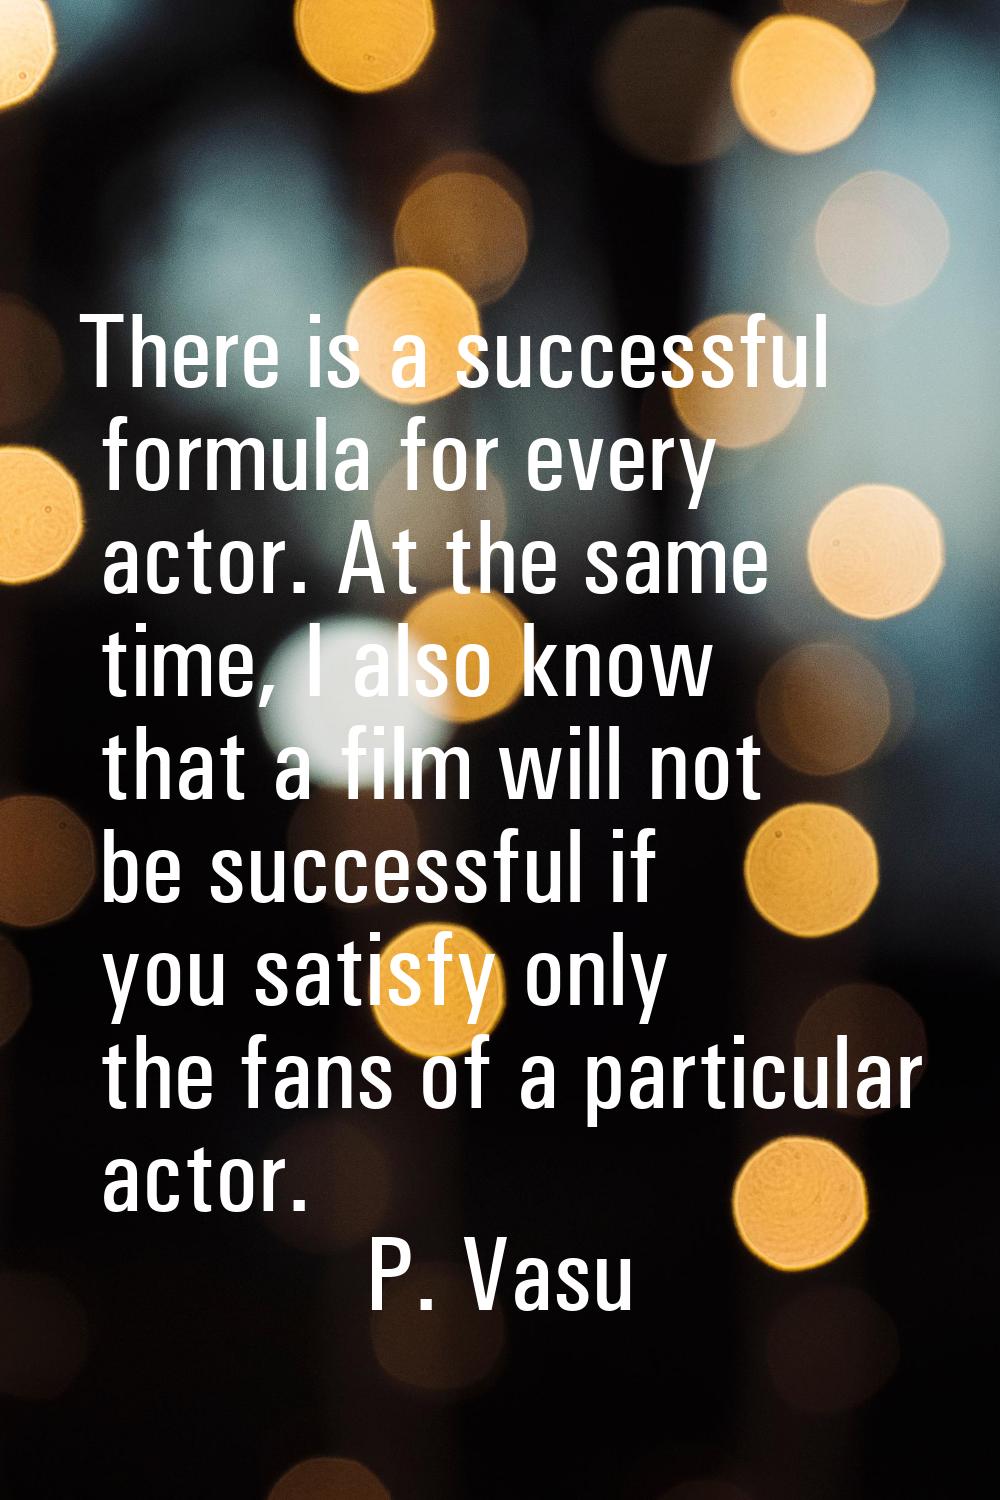 There is a successful formula for every actor. At the same time, I also know that a film will not b